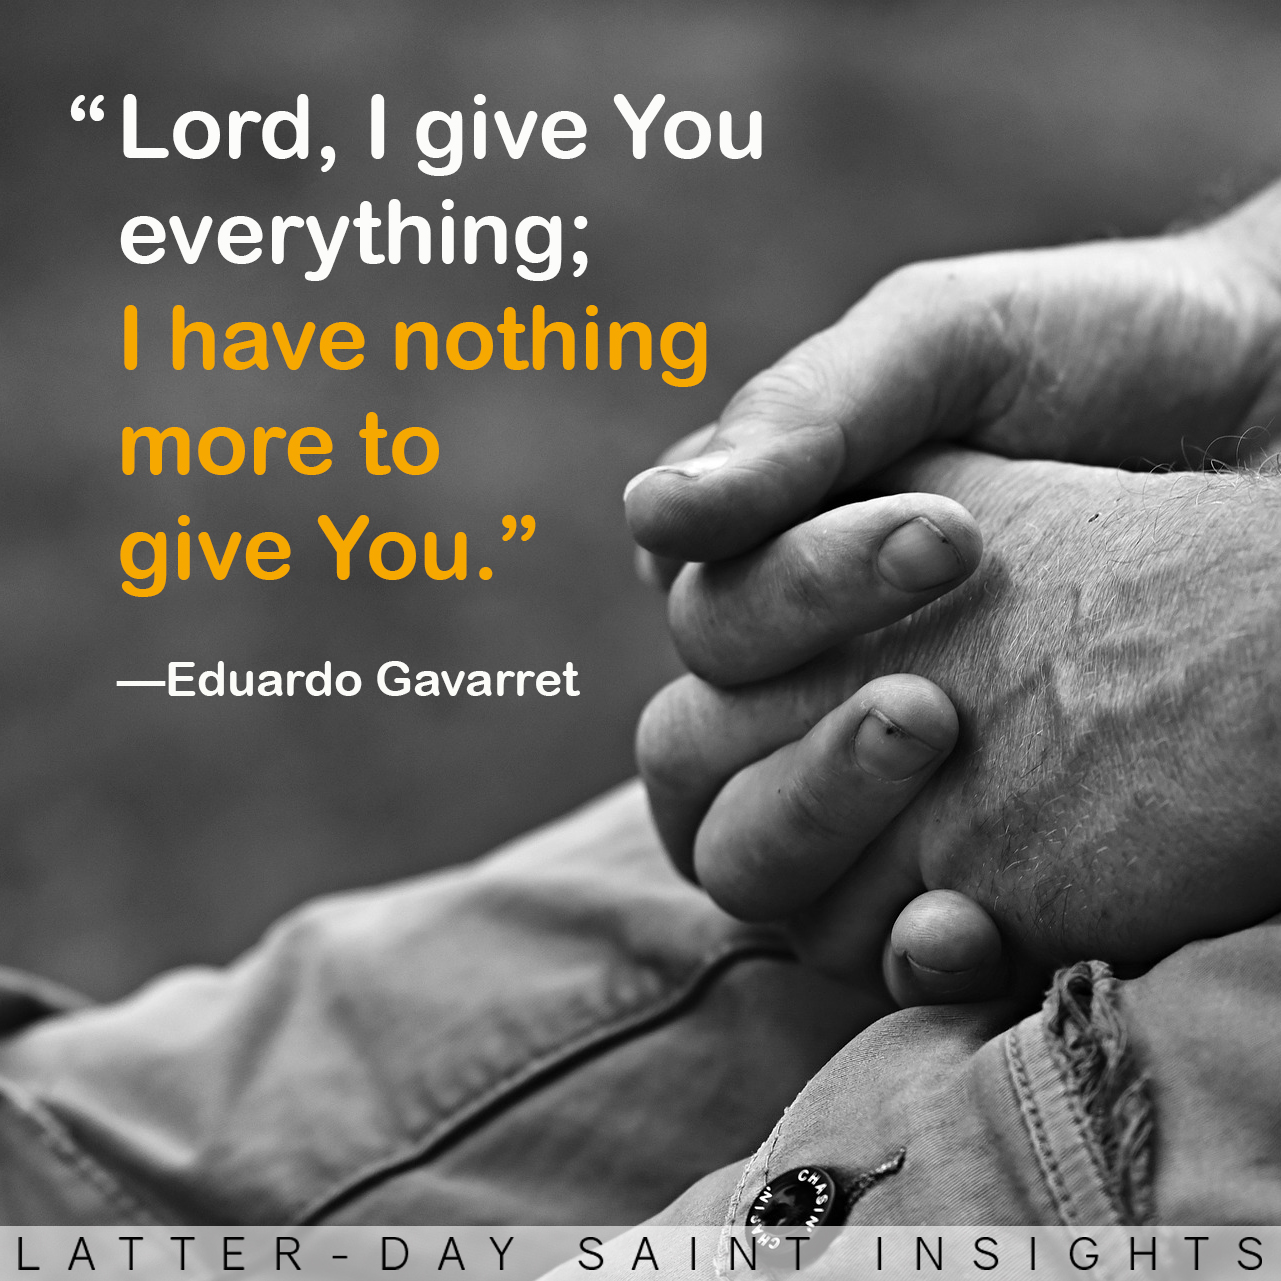 "Lord, I give You everything; I have nothing more to give You." -Eduardo Gavarret